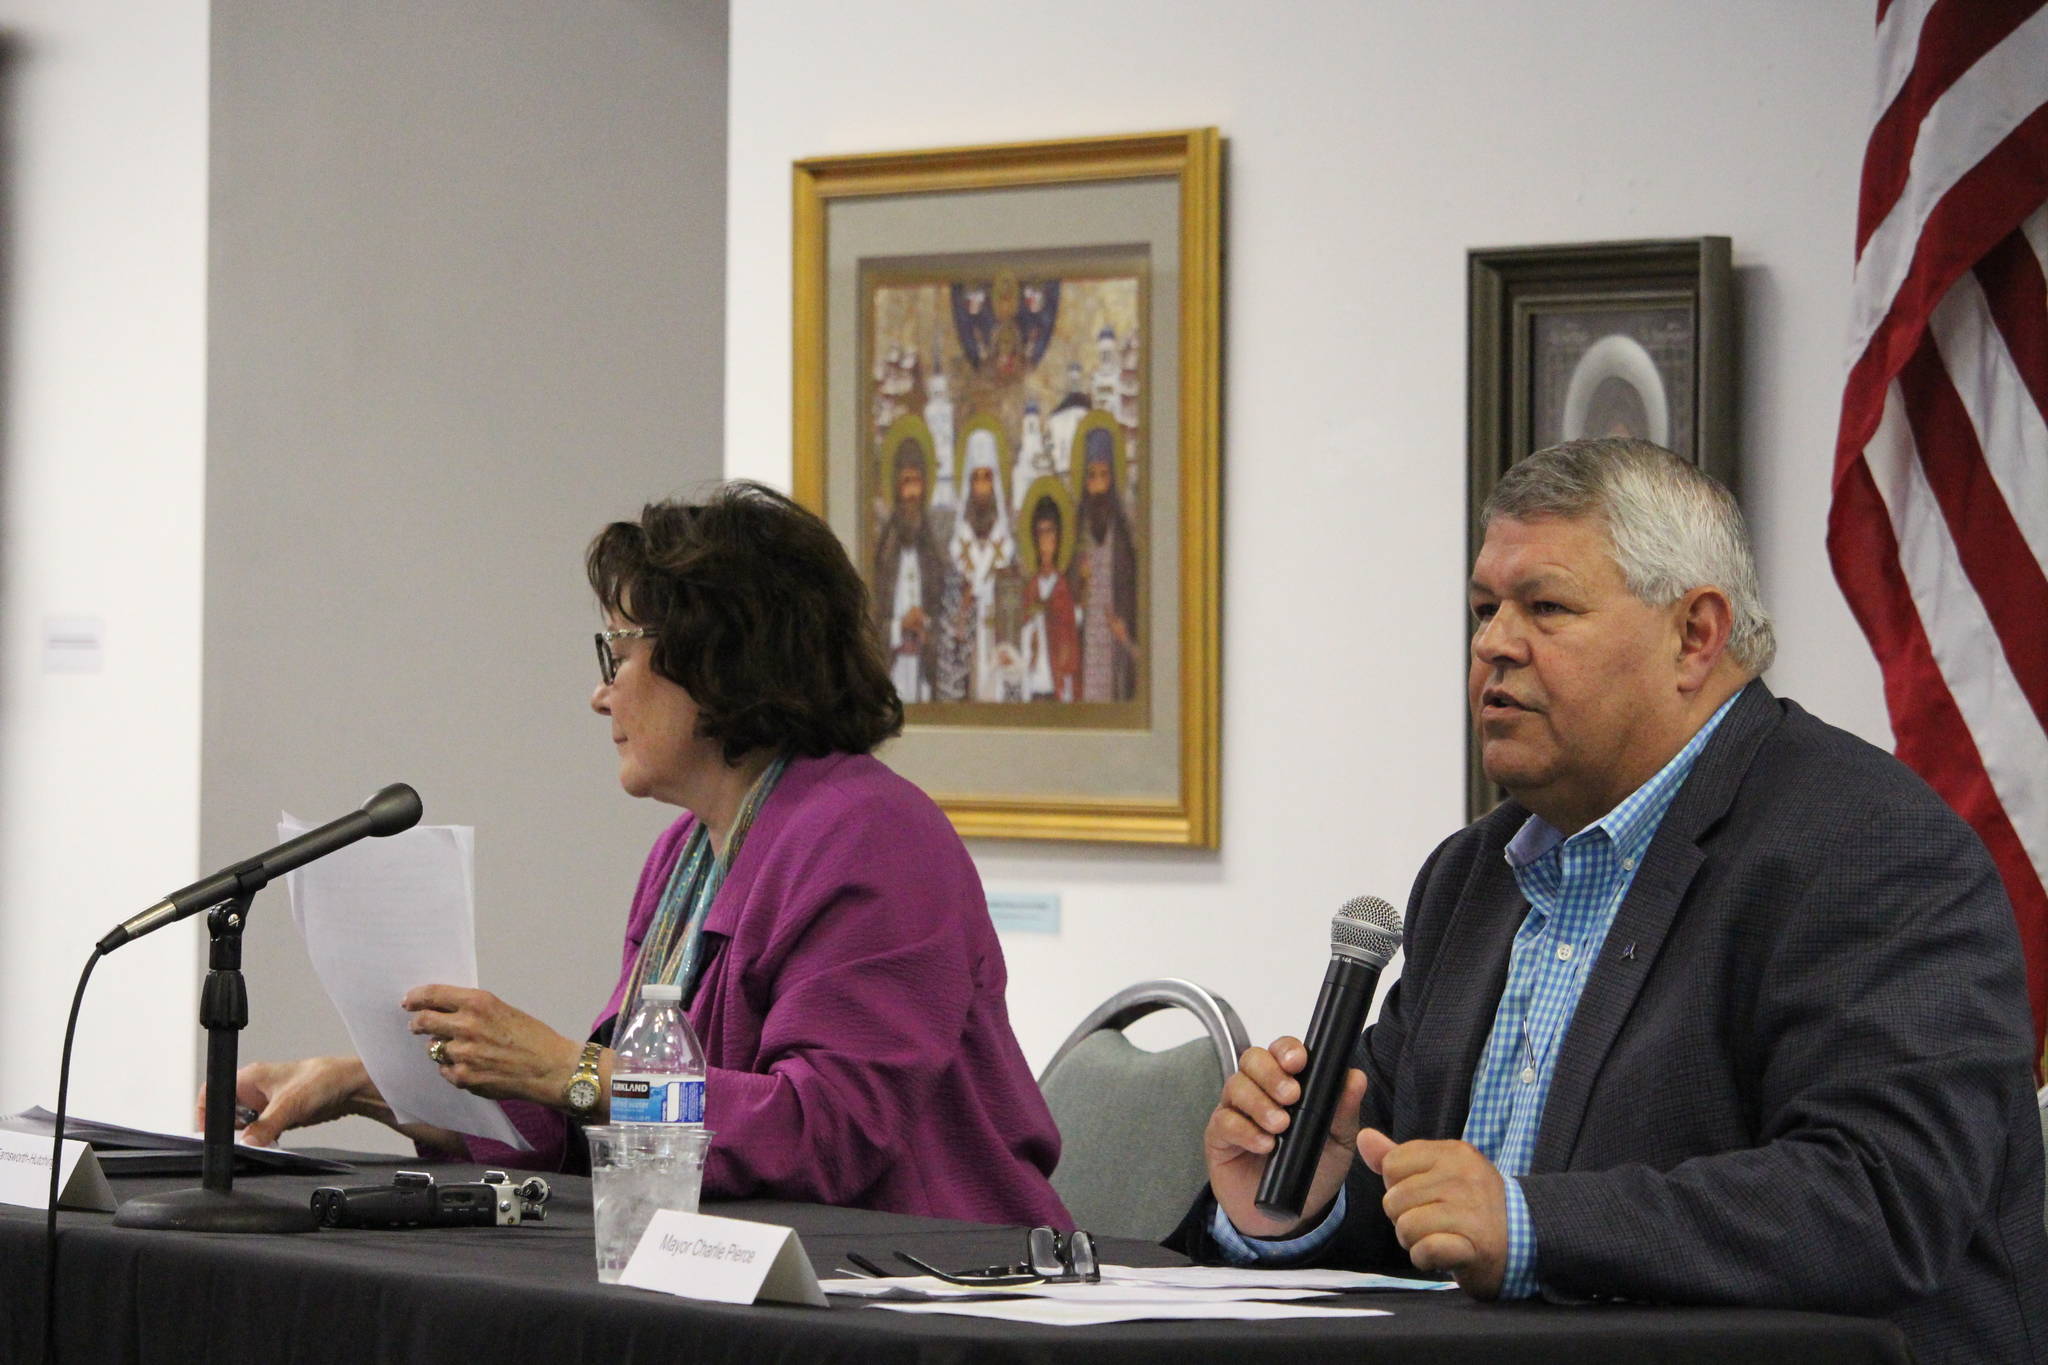 Then-mayoral candidate Linda Farnsworth-Hutchings, left, and Kenai Peninsula Borough Mayor Charlie Pierce participate in a forum on Sept. 9, 2020 in Kenai. The City of Soldotna and borough have clashed over the recommendation to appoint Farnsworth-Hutchings to the borough planning commission. (Photo by Brian Mazurek/Peninsula Clarion file)